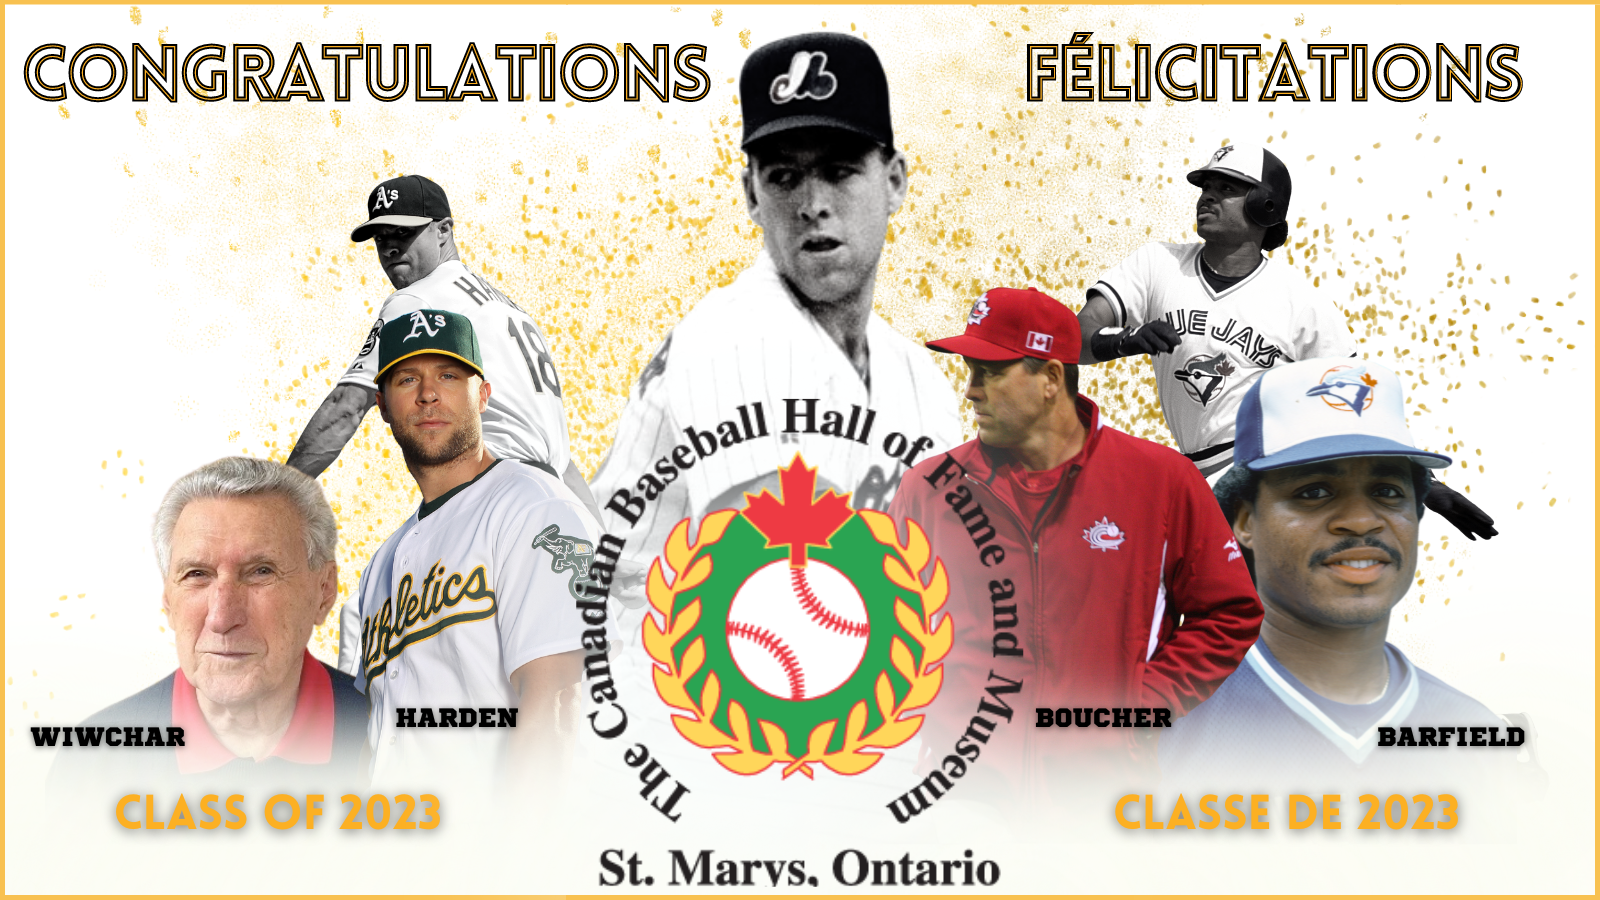 Boucher, Barfield, Harden, Wiwchar to be inducted into Canadian Baseball Hall of Fame